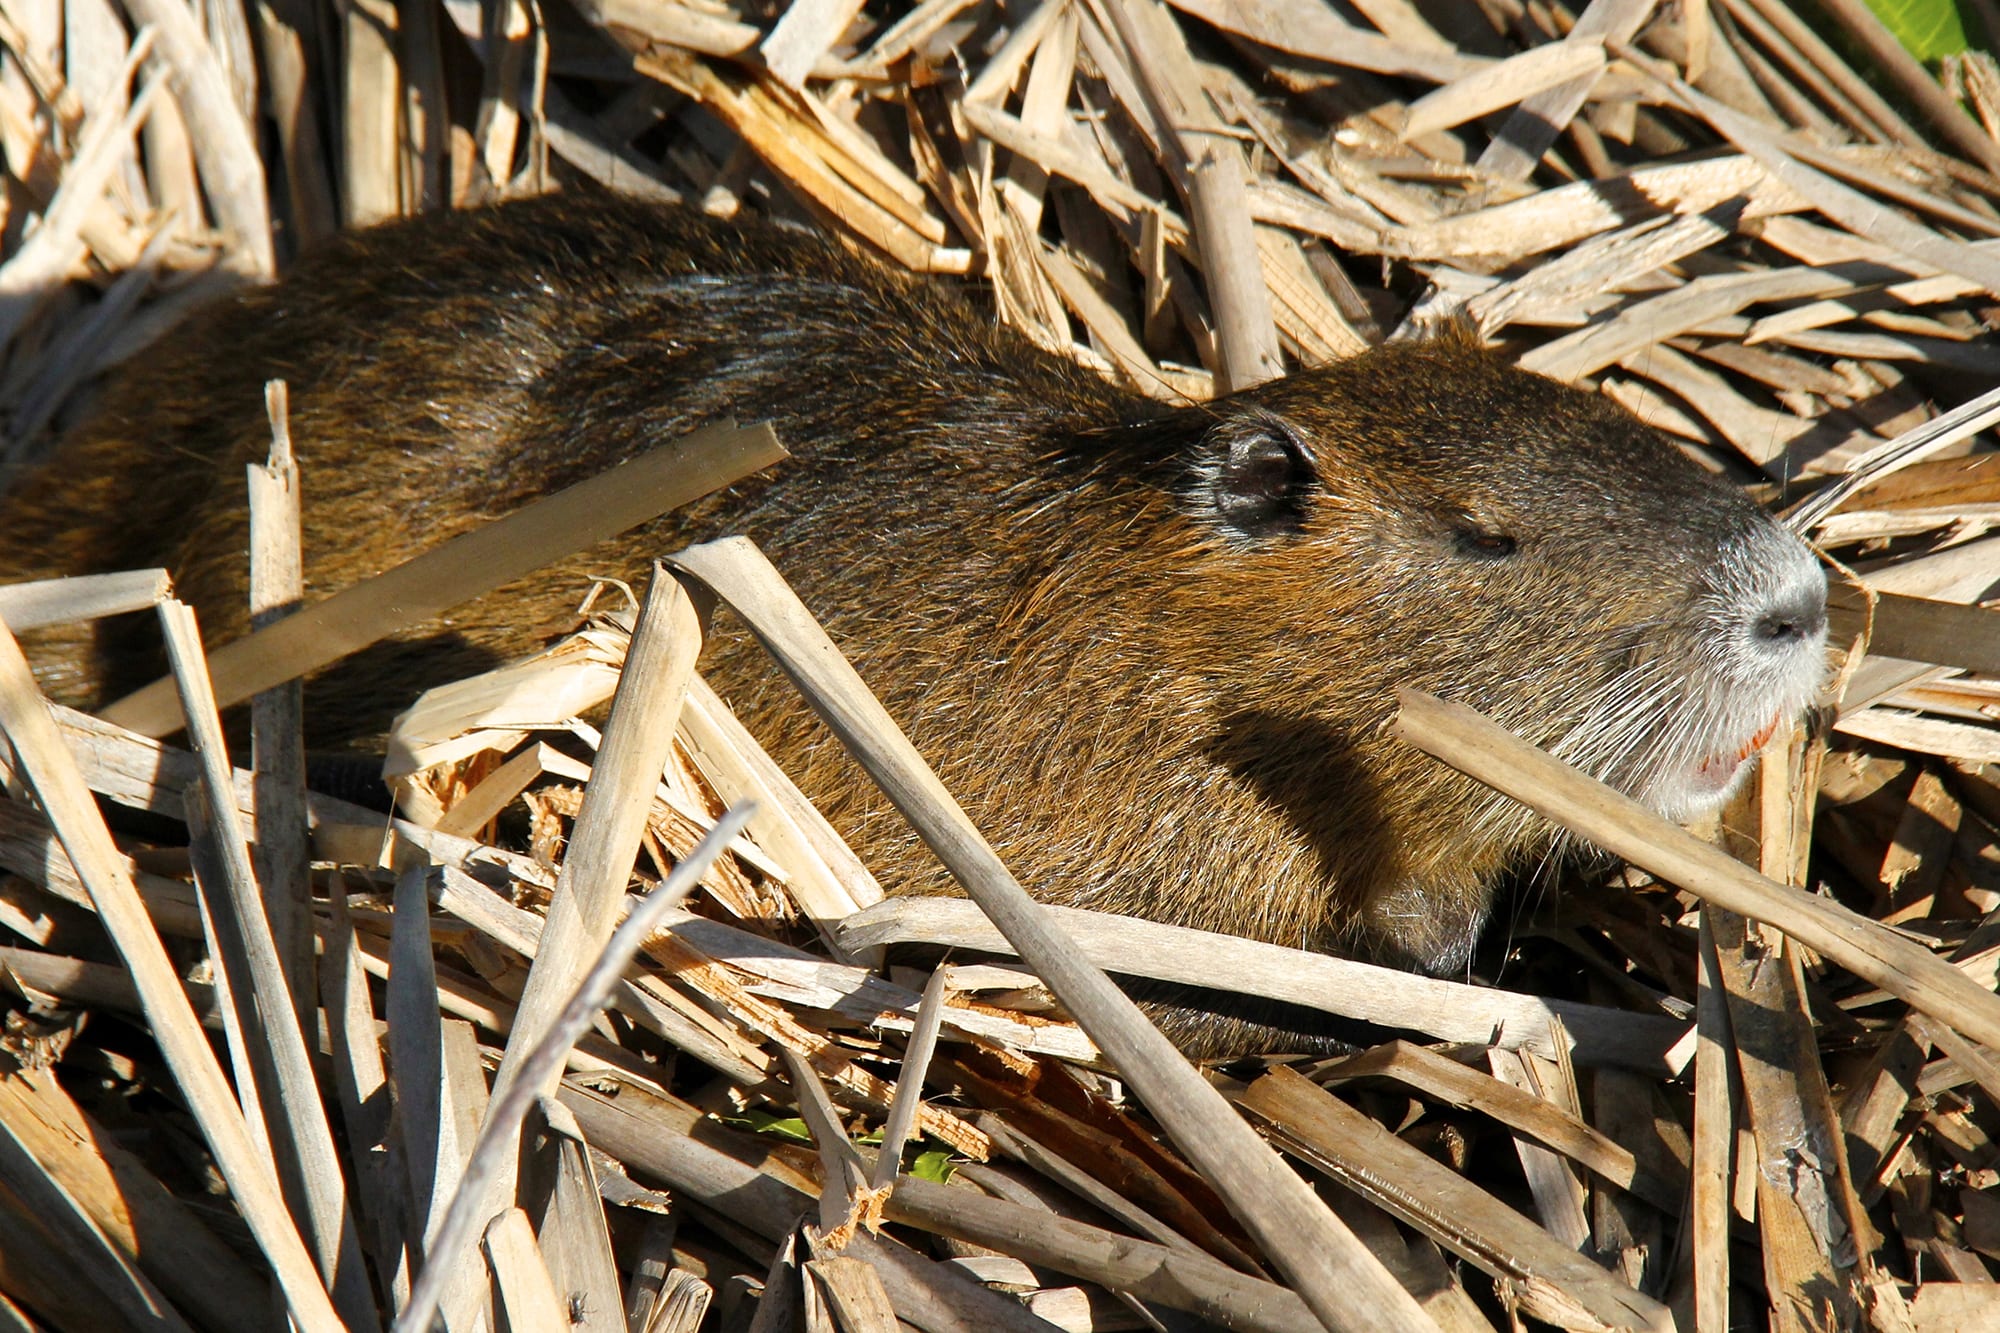 The nutria is a giant rodent that enjoys warm climes